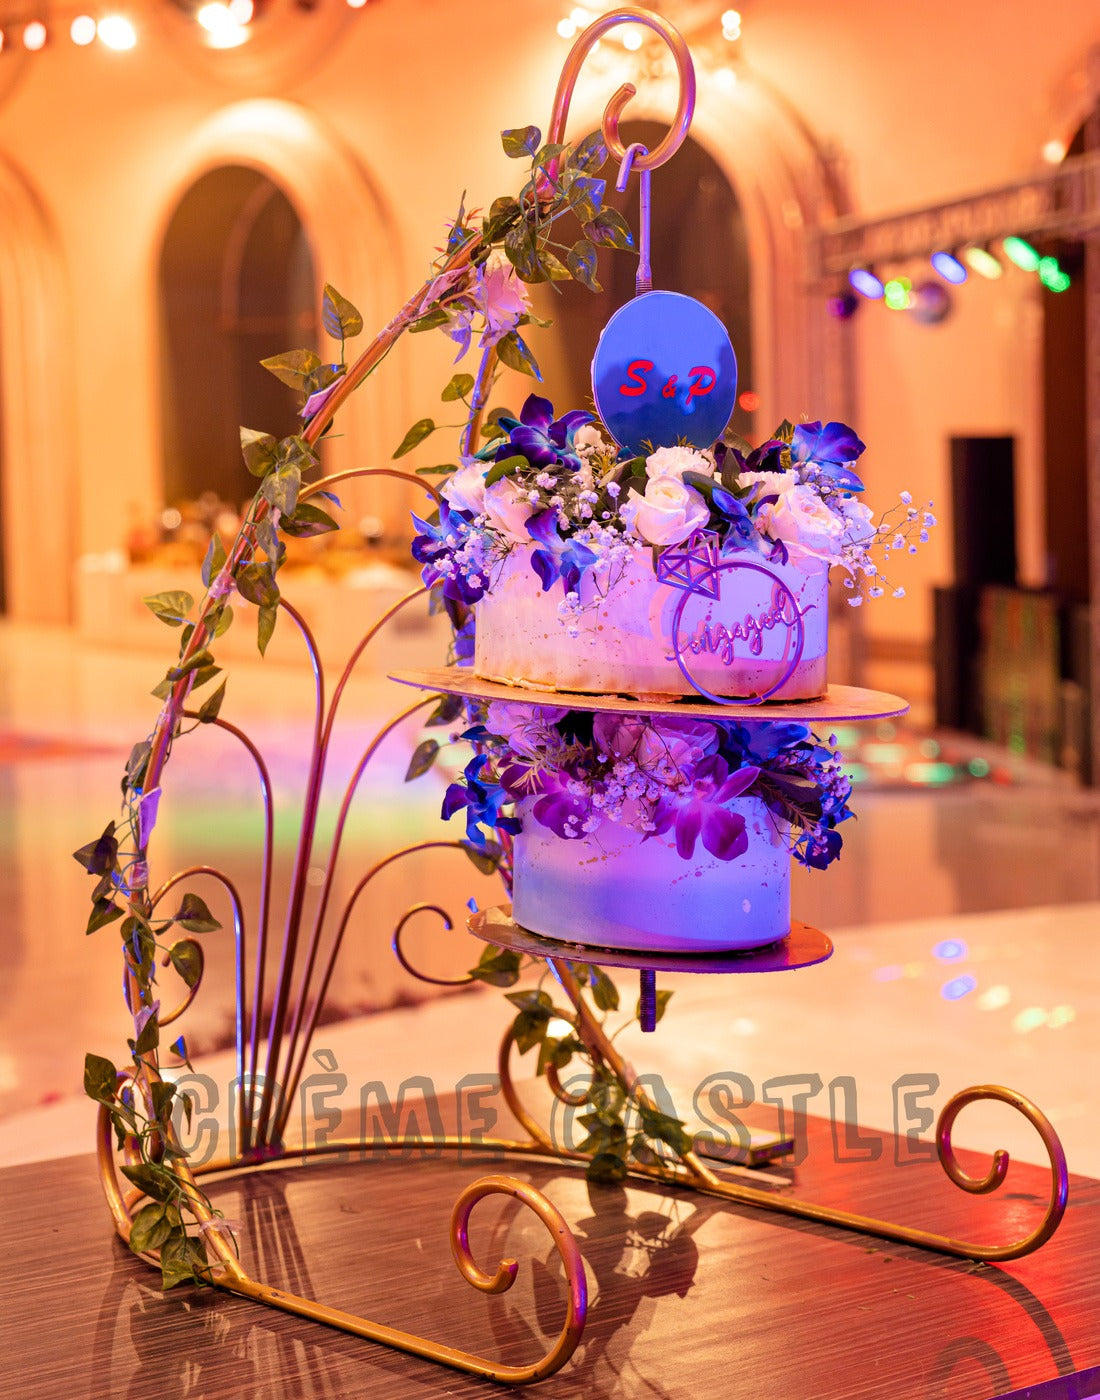 Chandelier Cakes make their way to India! - India News & Updates on  EVENTFAQS